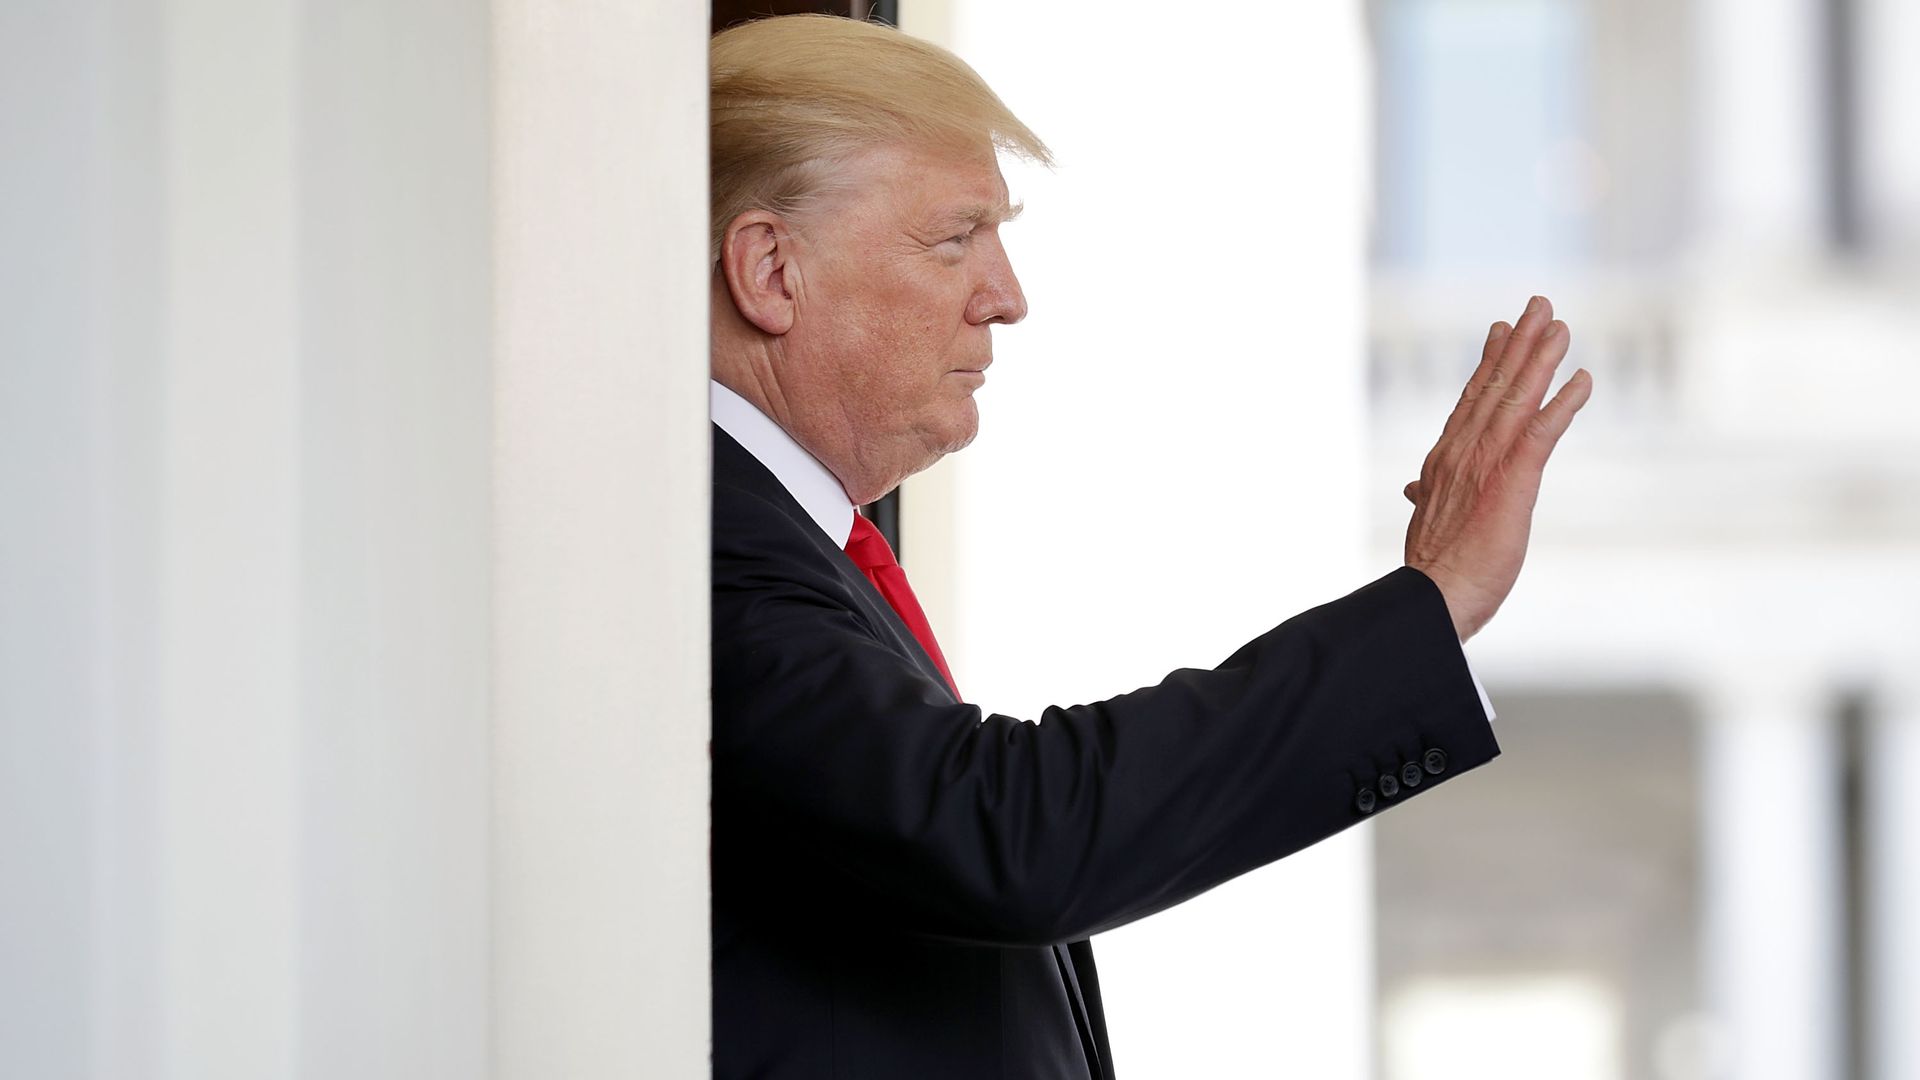 In this image, Trump waves from behind a white pillar. 